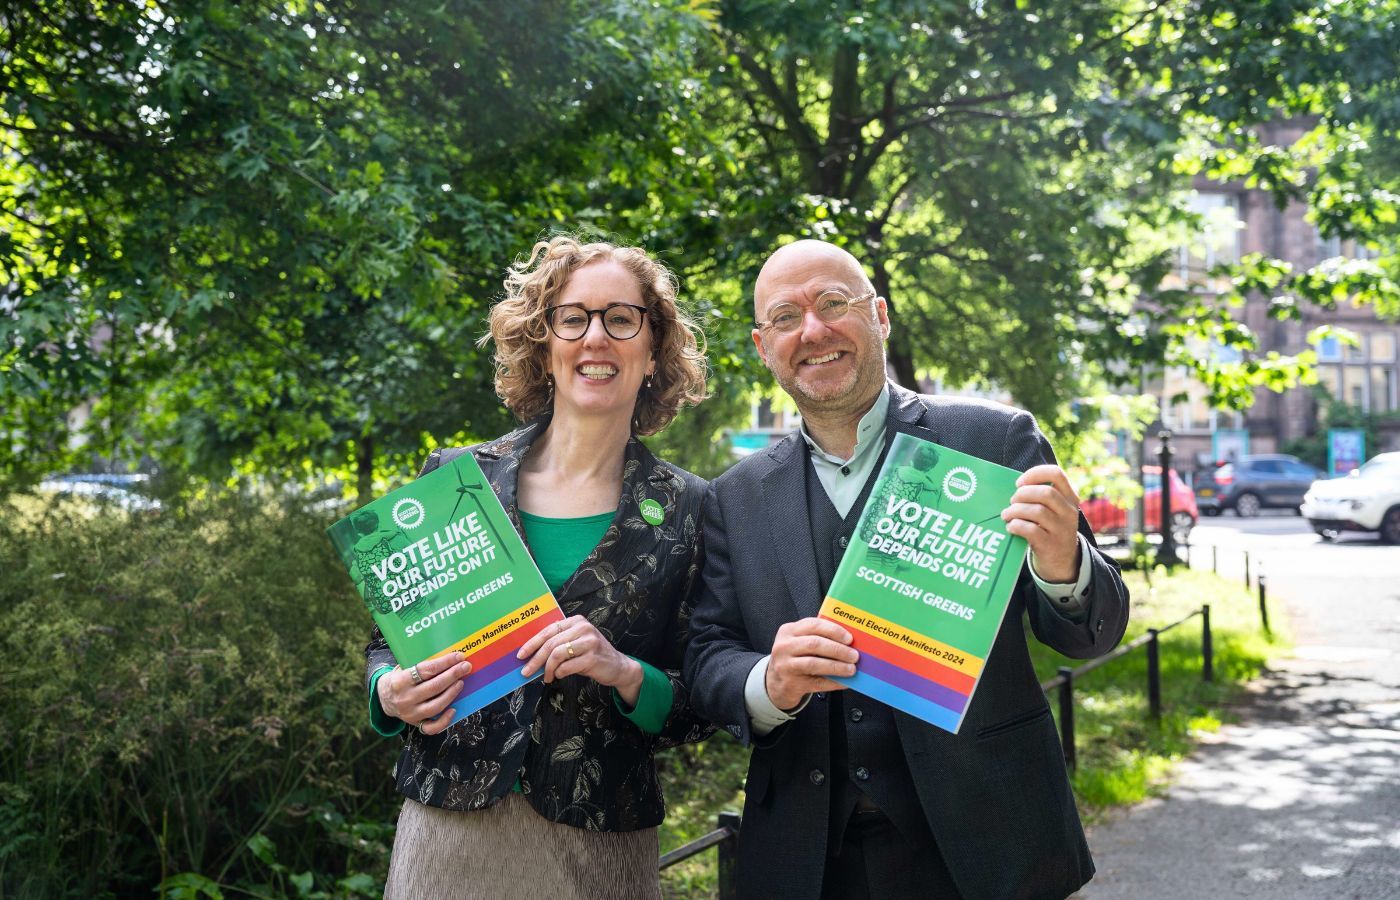 Scottish Greens co-leaders Lorna Slater and Patrick Harvie put the environment front and centre in their manifesto.